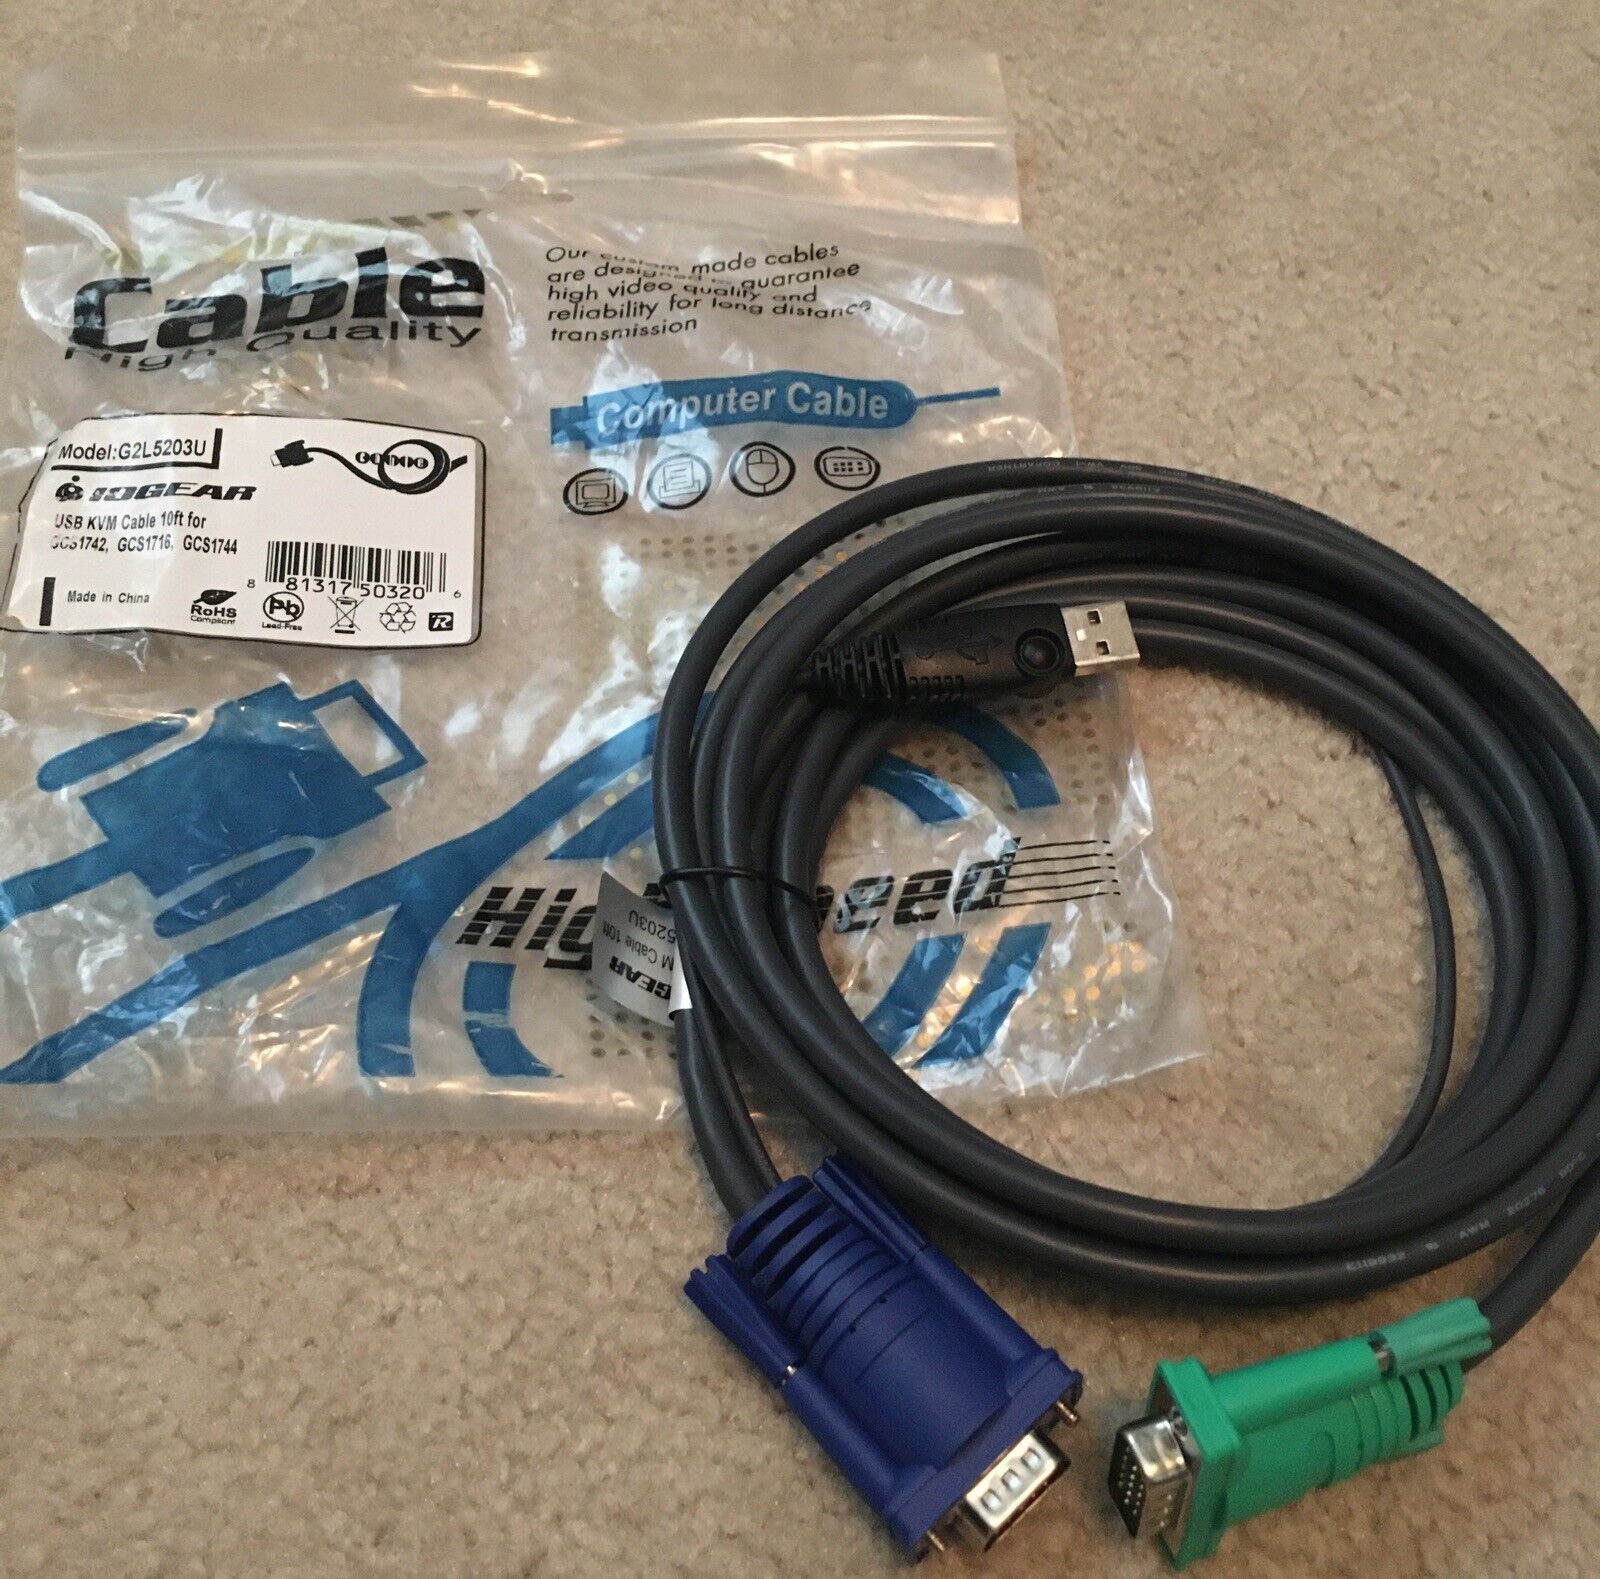 IOGEAR USB KVM Bonded Cable 10-Feet with USB and VGA Connections (G2L5203U)